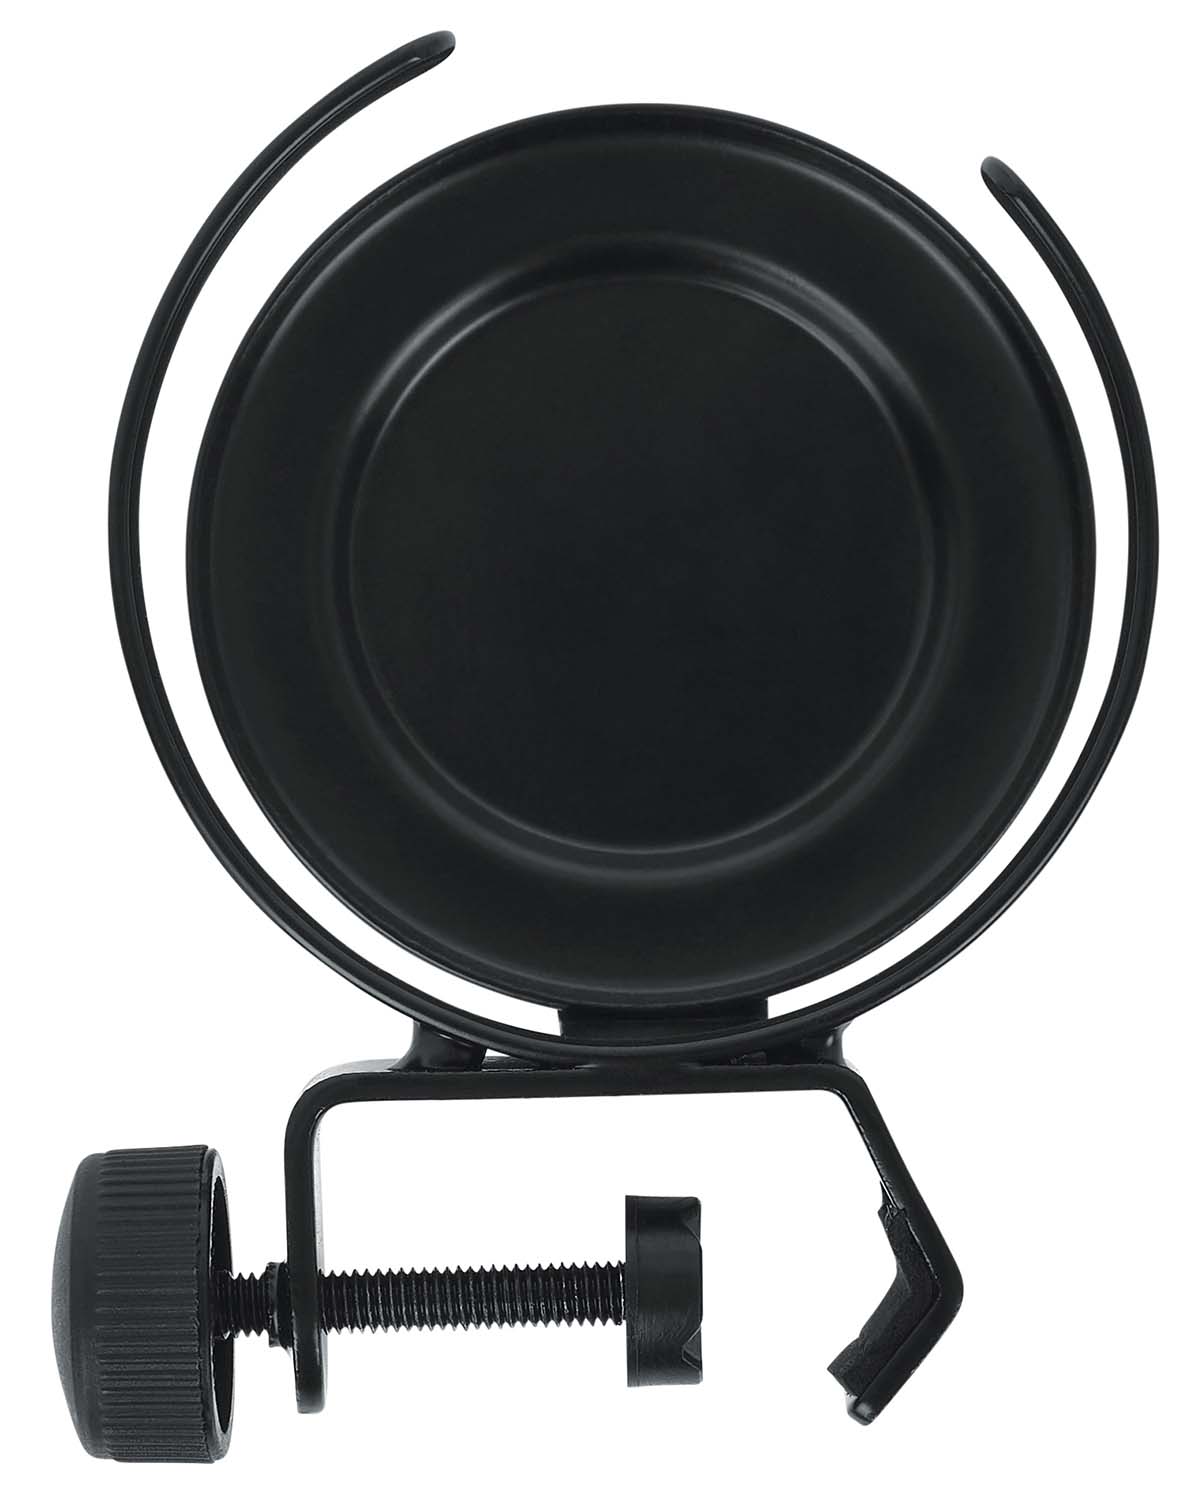 Gator GFW-SINGLECUP Single Cup Beverage Holder Mount For Stand - Hollywood DJ